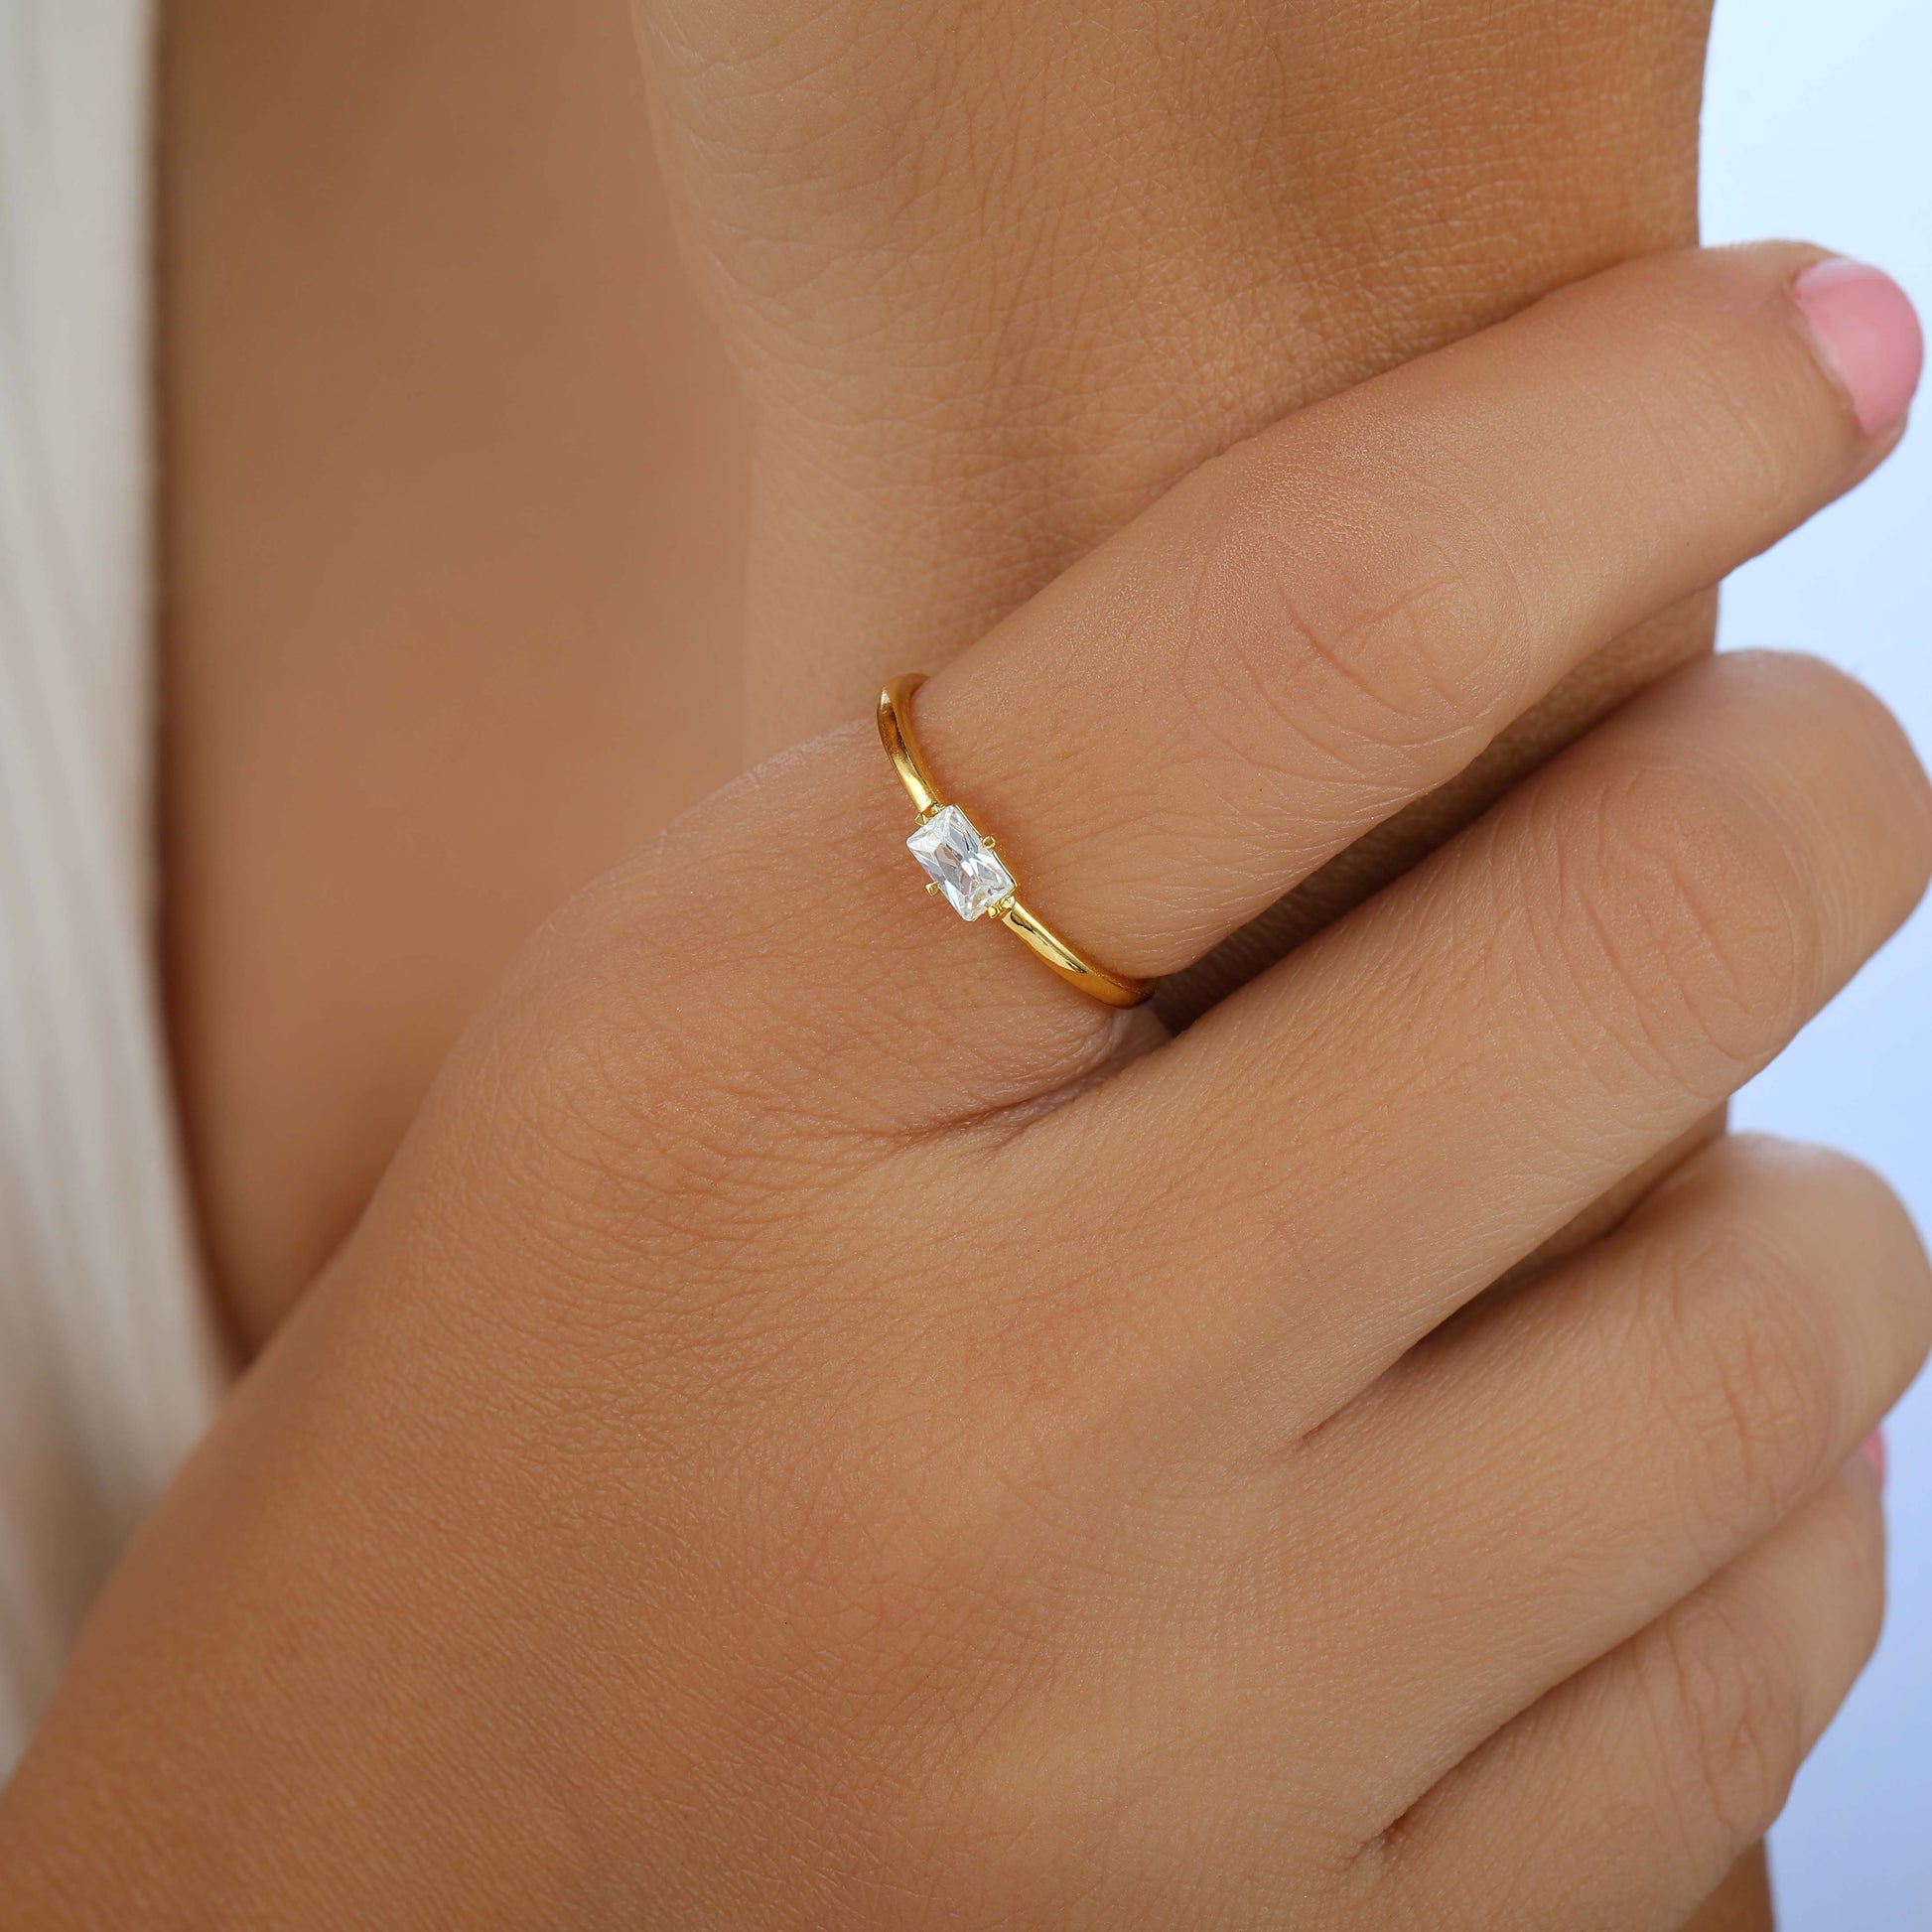 she is wearing Lab-grown Diamond Radiant Cut Engagement Ring